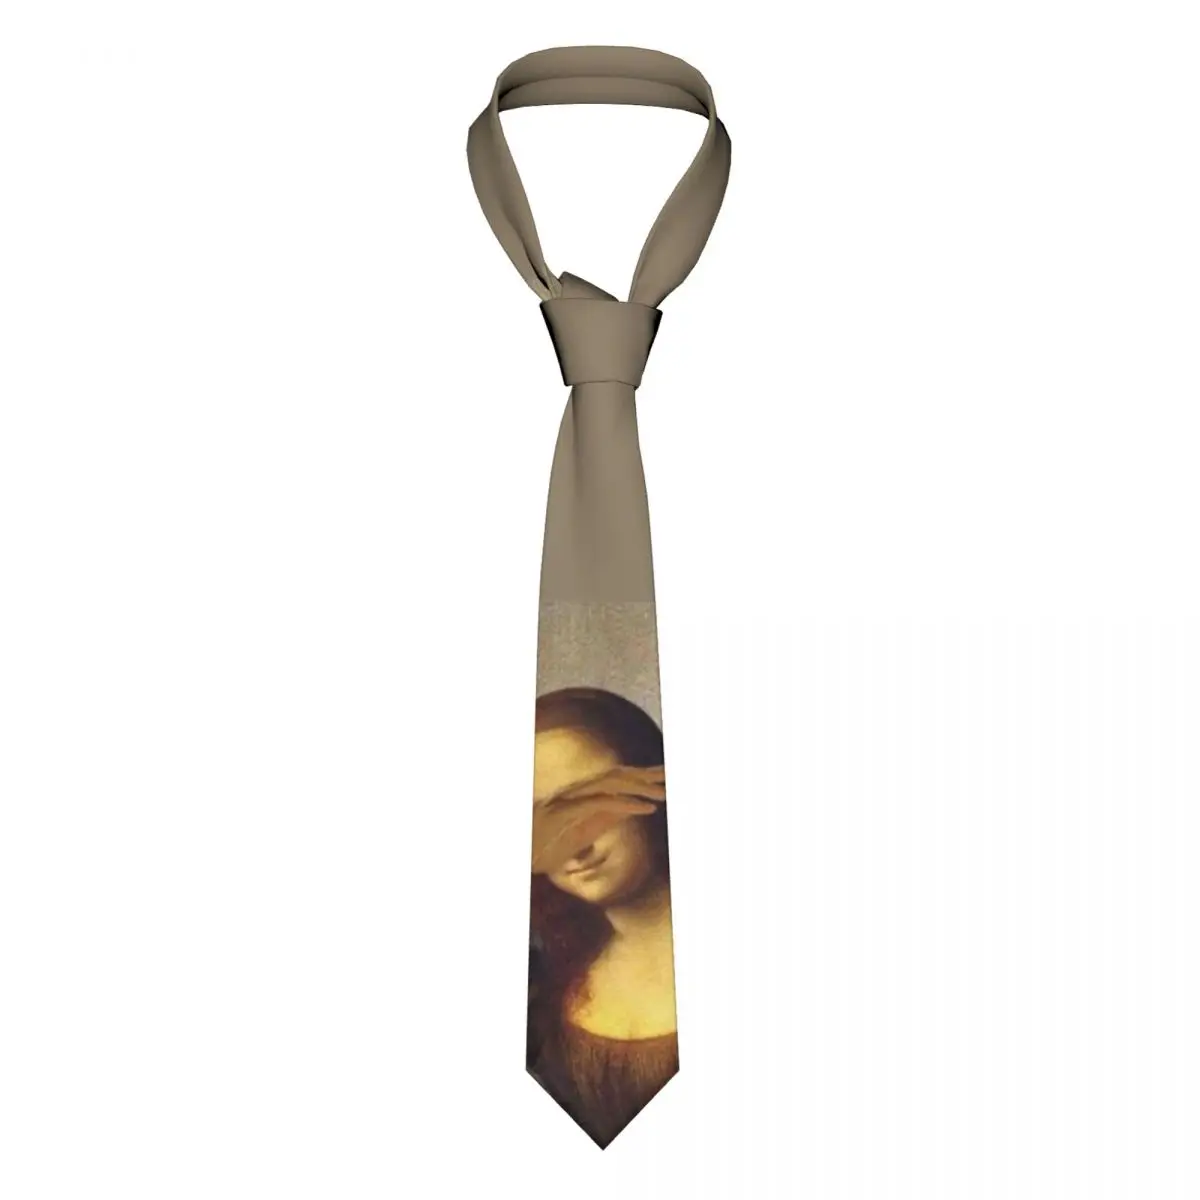 

Mona Lisa Dab Meme Neckties Unisex Polyester 8 cm Neck Ties for Mens Casual Wide Daily Wear Gravatas Business